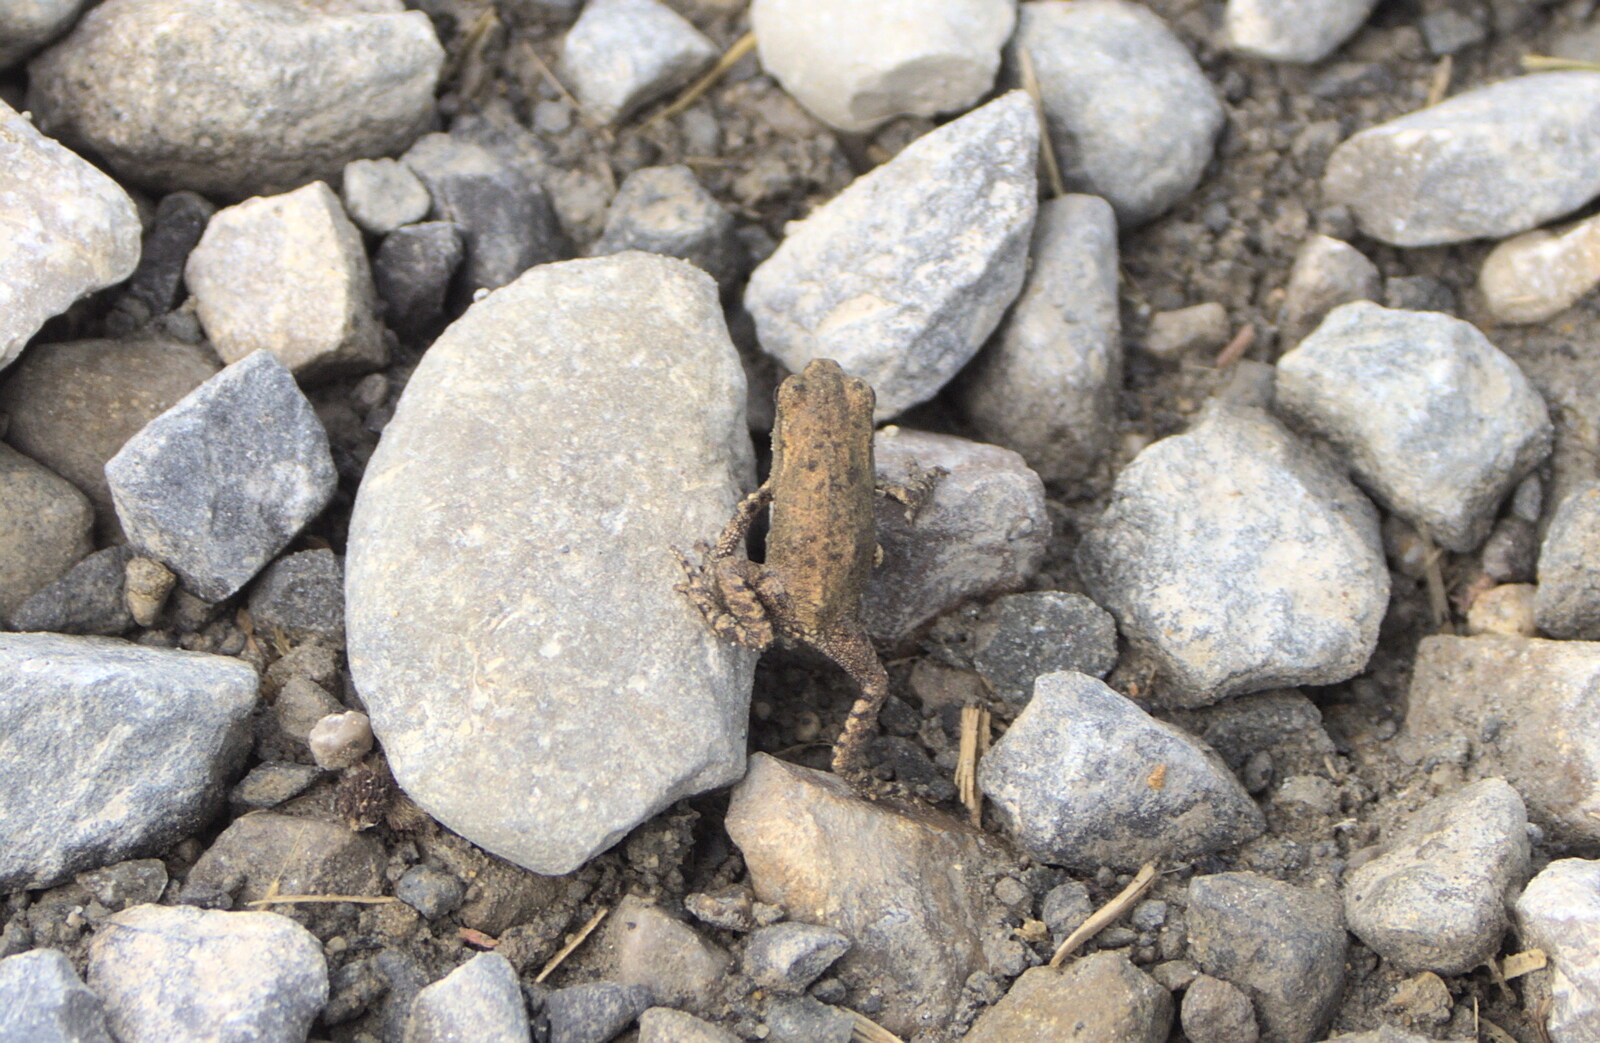 A Tuscan Winery and a Trip to Siena, Tuscany, Italy - 10th June 2013: We spot loads of toadlets on the ground